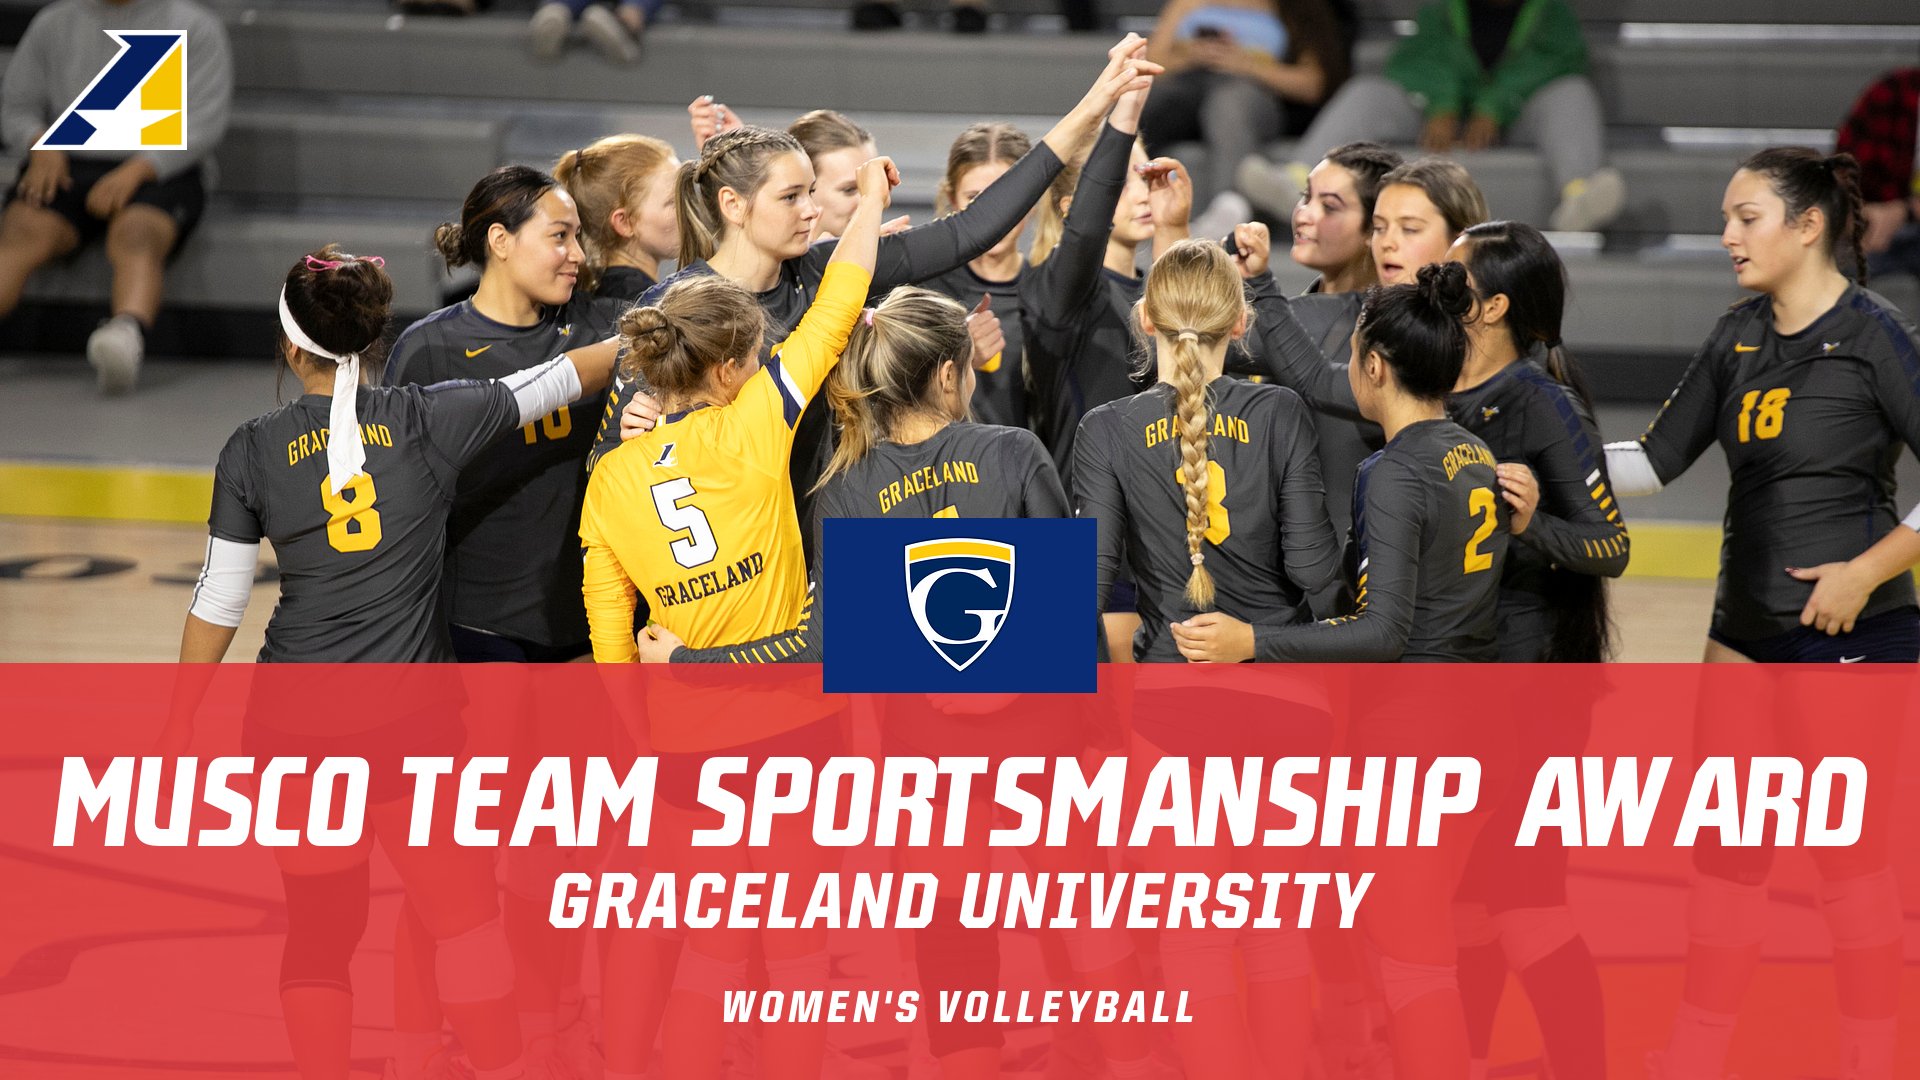 Graceland Women’s Volleyball Selected for the Musco Team Sportsmanship Award